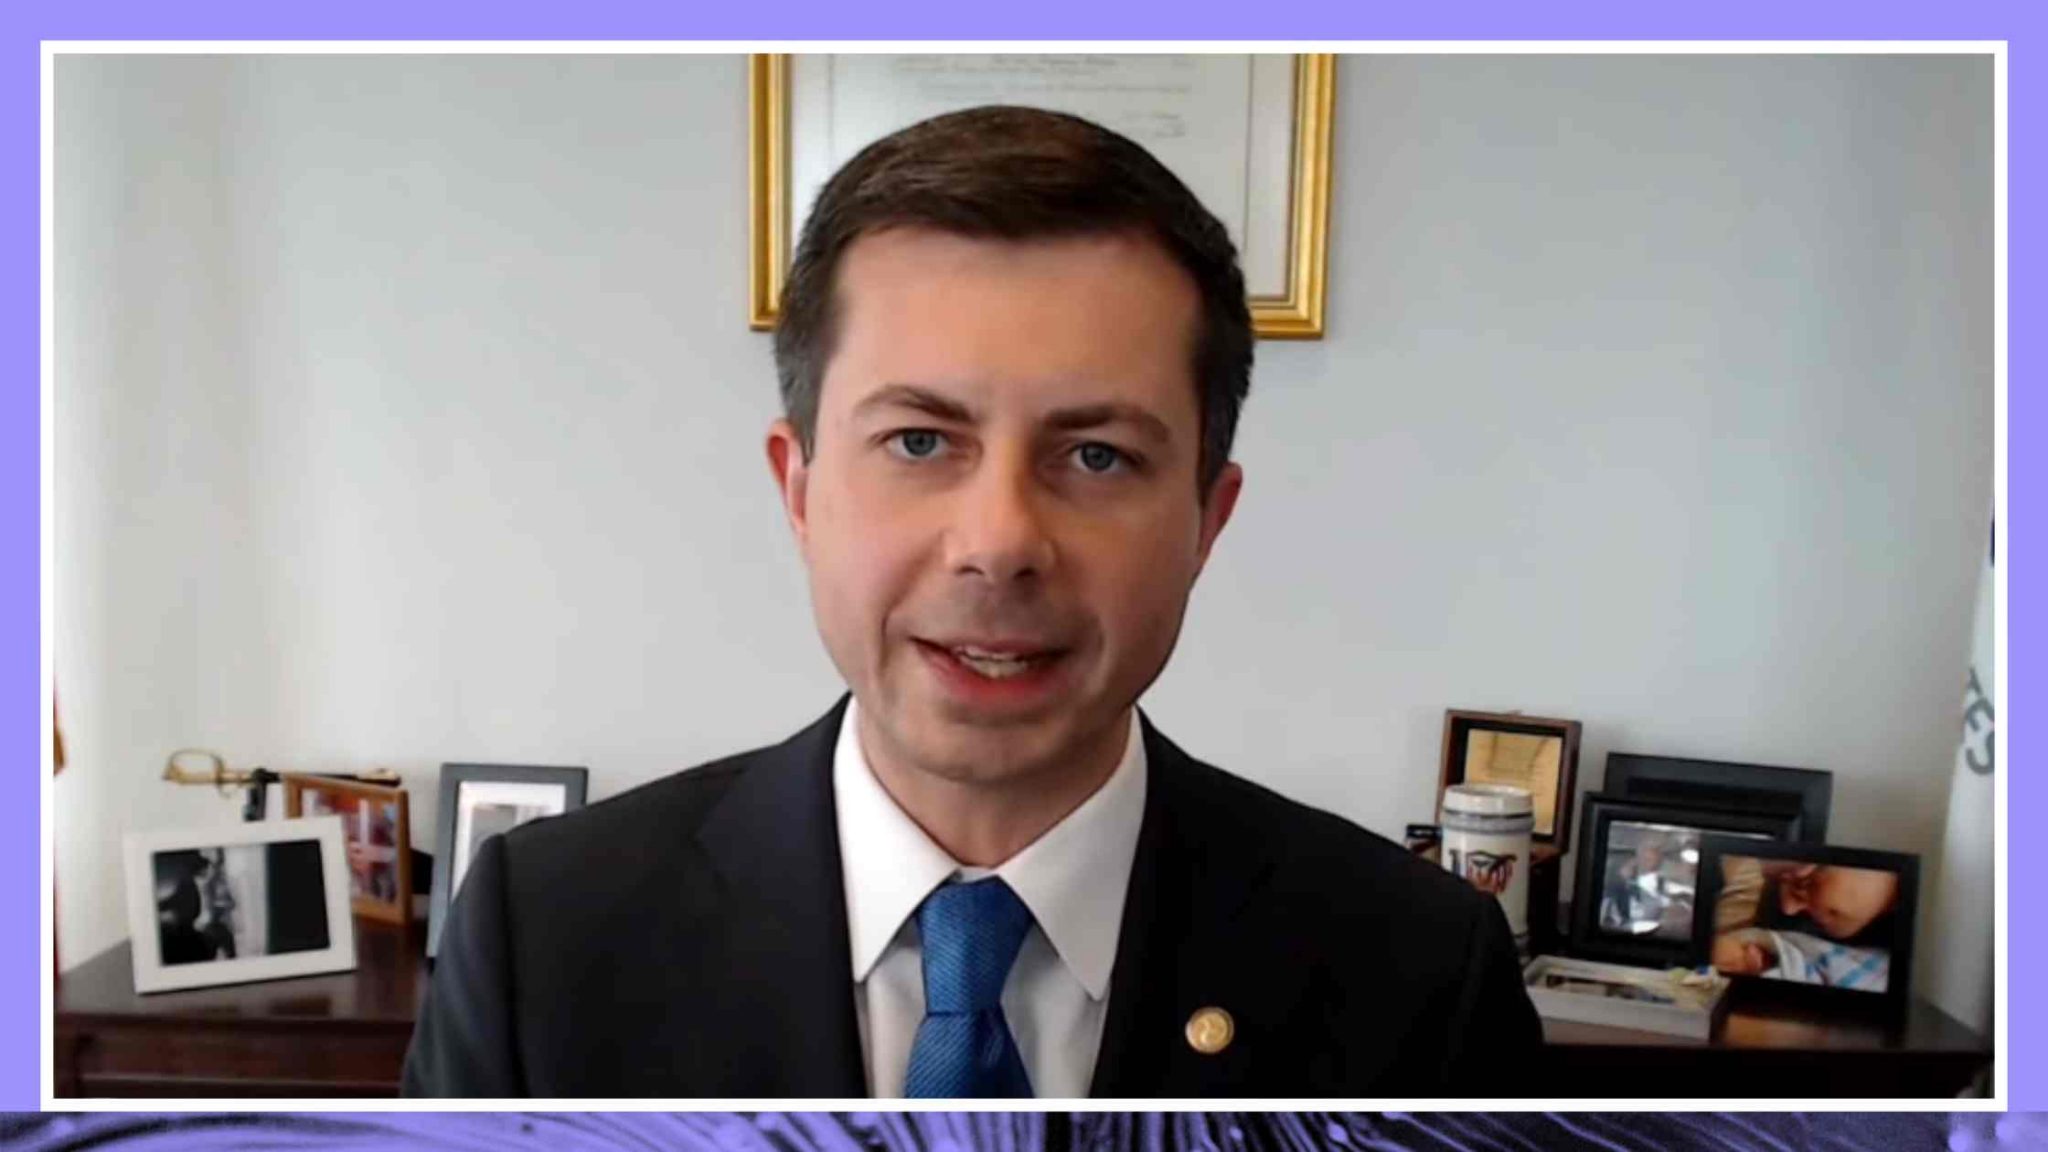 Buttigieg Says Not Speaking Out Sooner About Ohio Train Derailment is a “Lesson Learned" Transcript